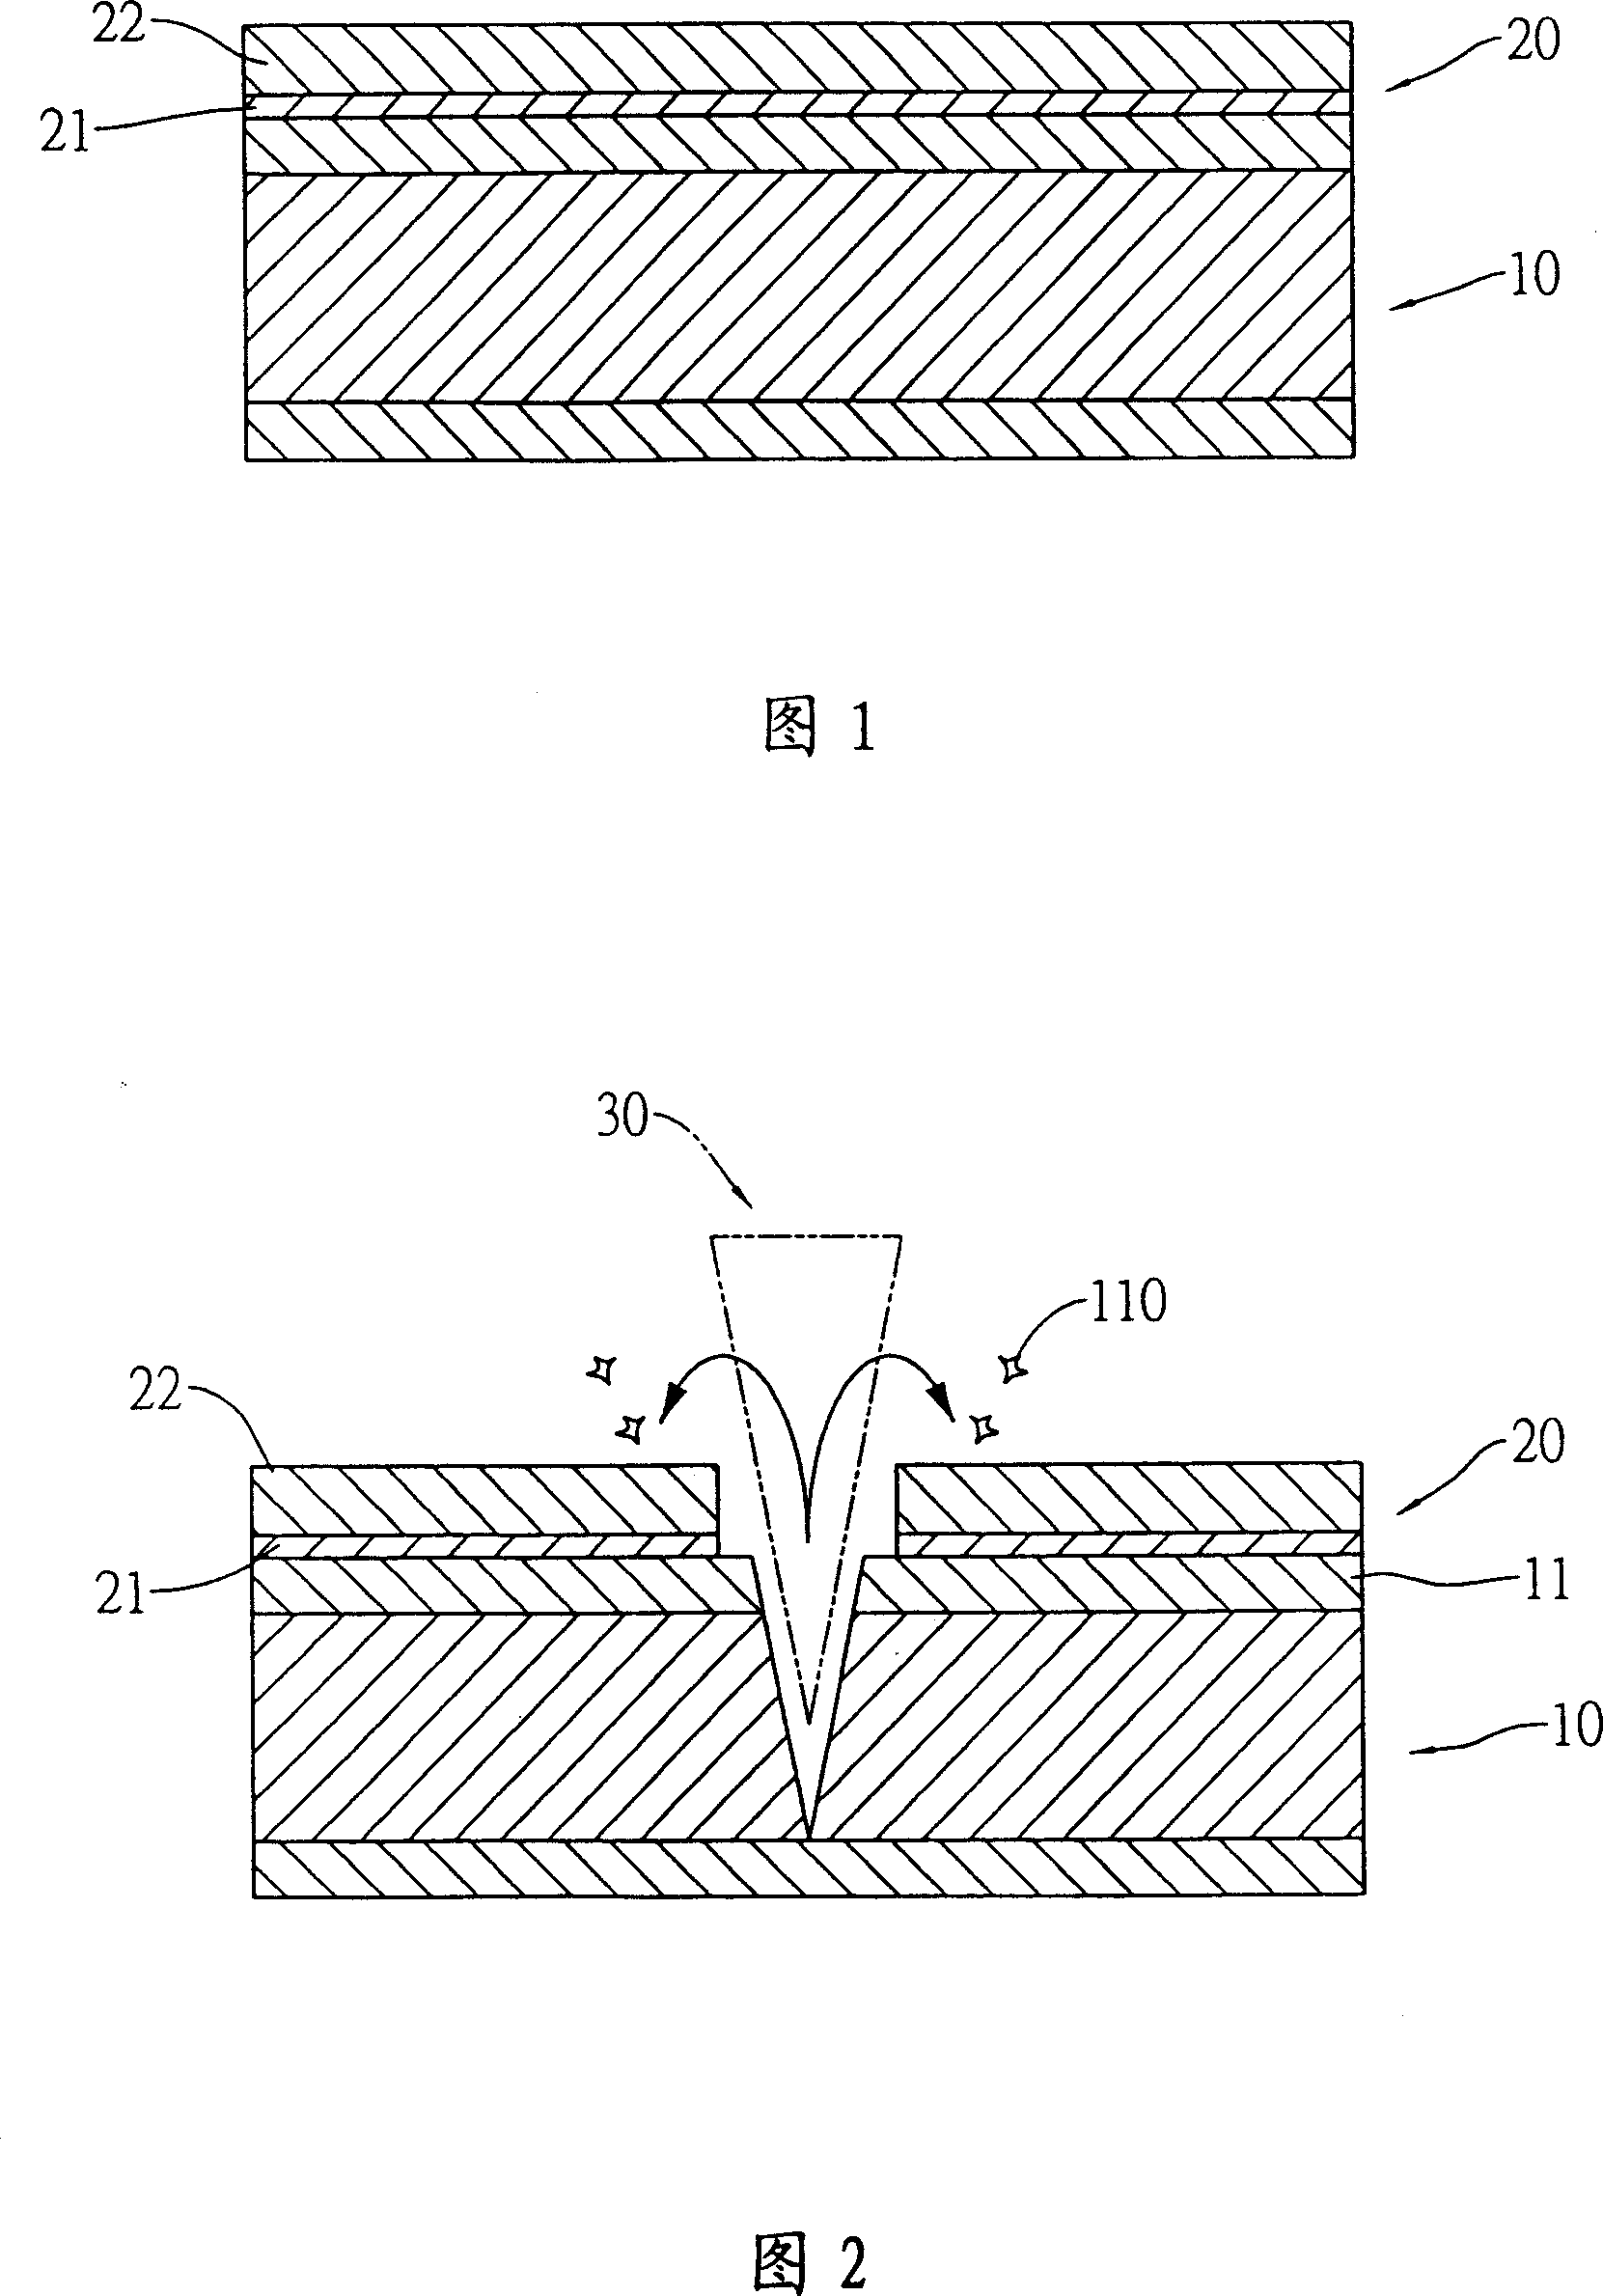 Residue removing method after circuit board laser drill processing